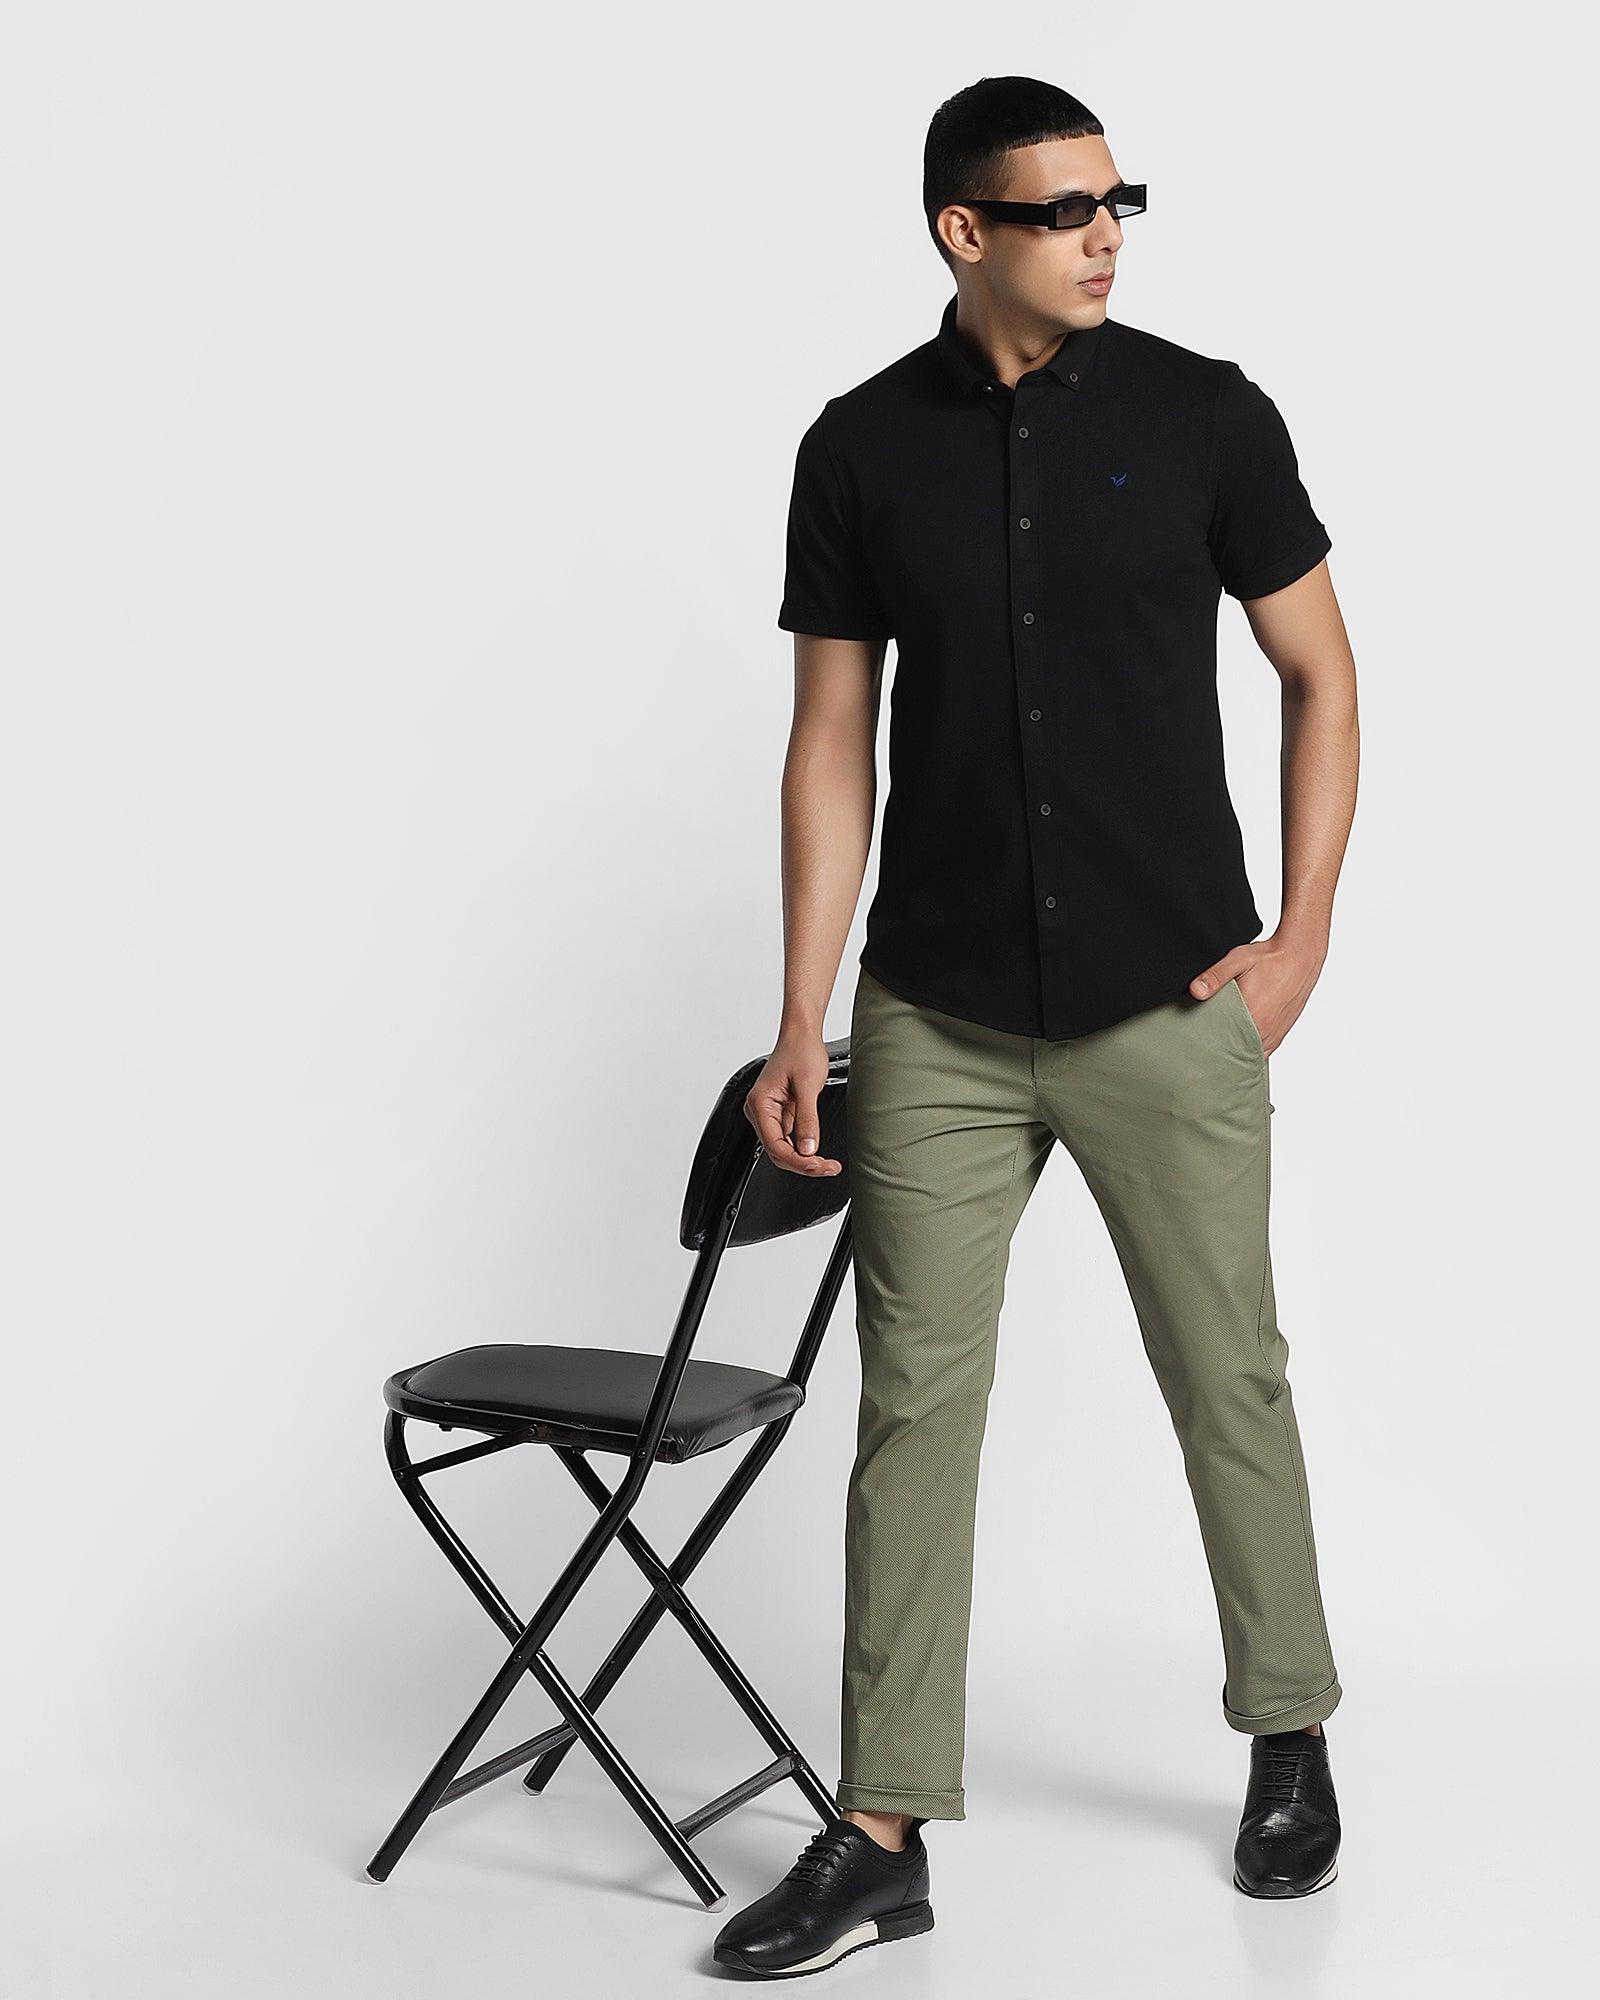 What Color Shirts Go Well With Black Pants (Fashion 2023)